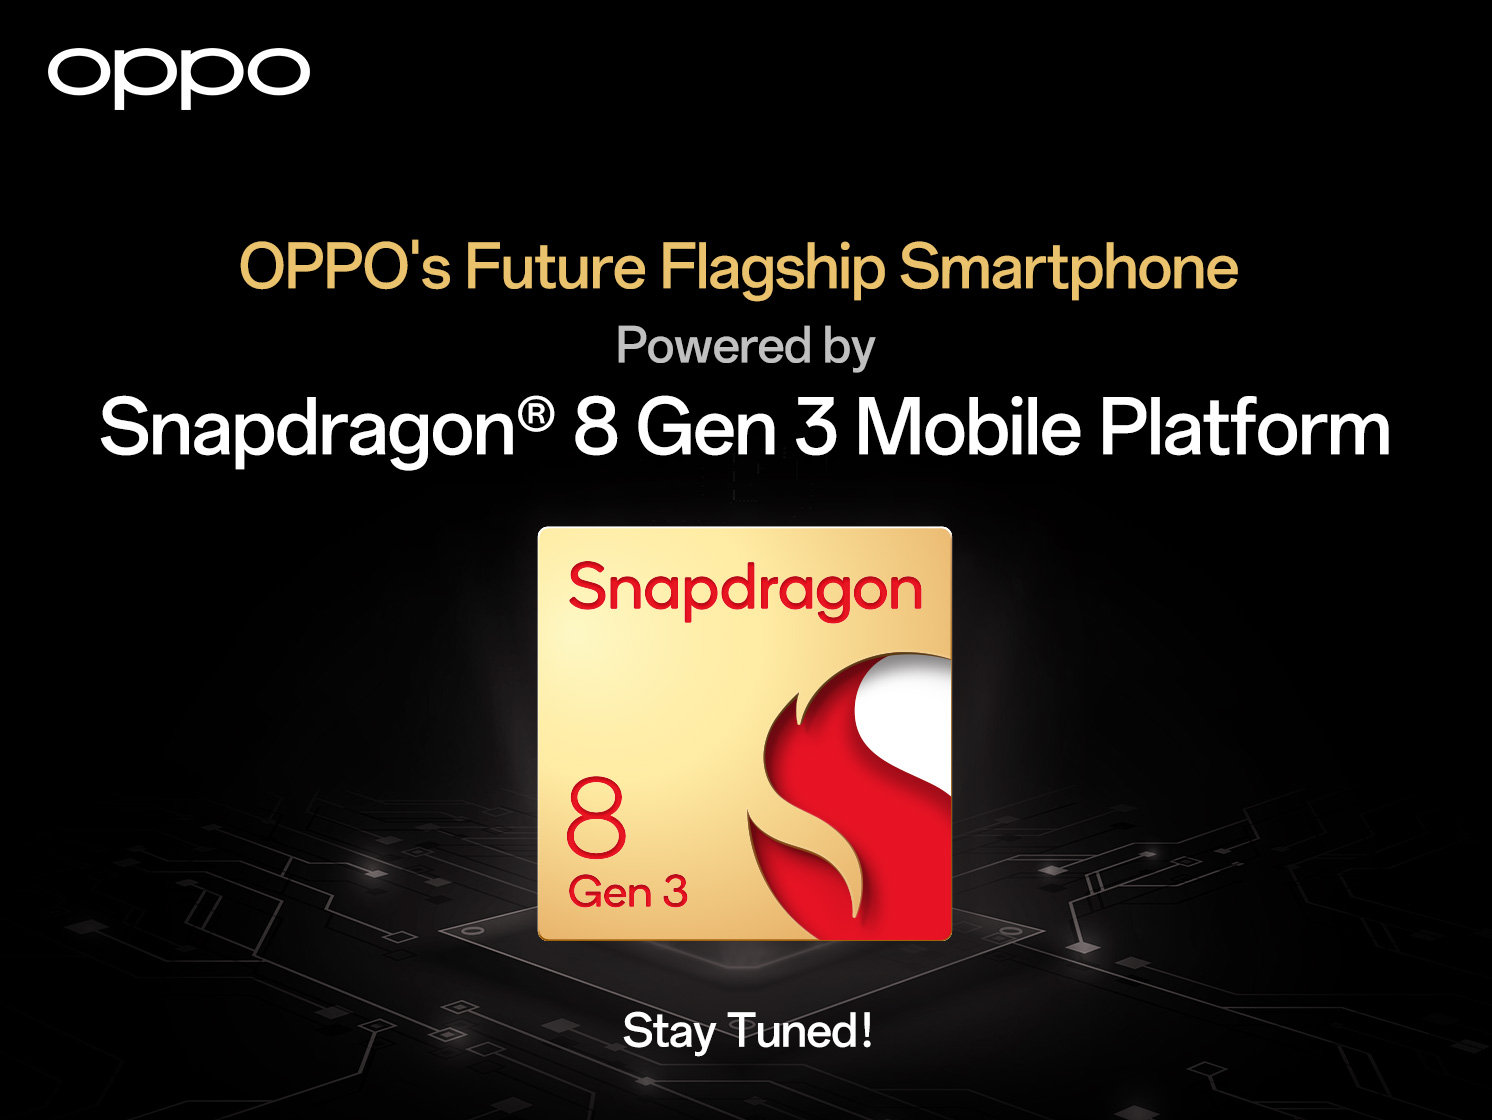 Qualcomm Snapdragon 8 Gen 3 to be announced on Oct 25 during